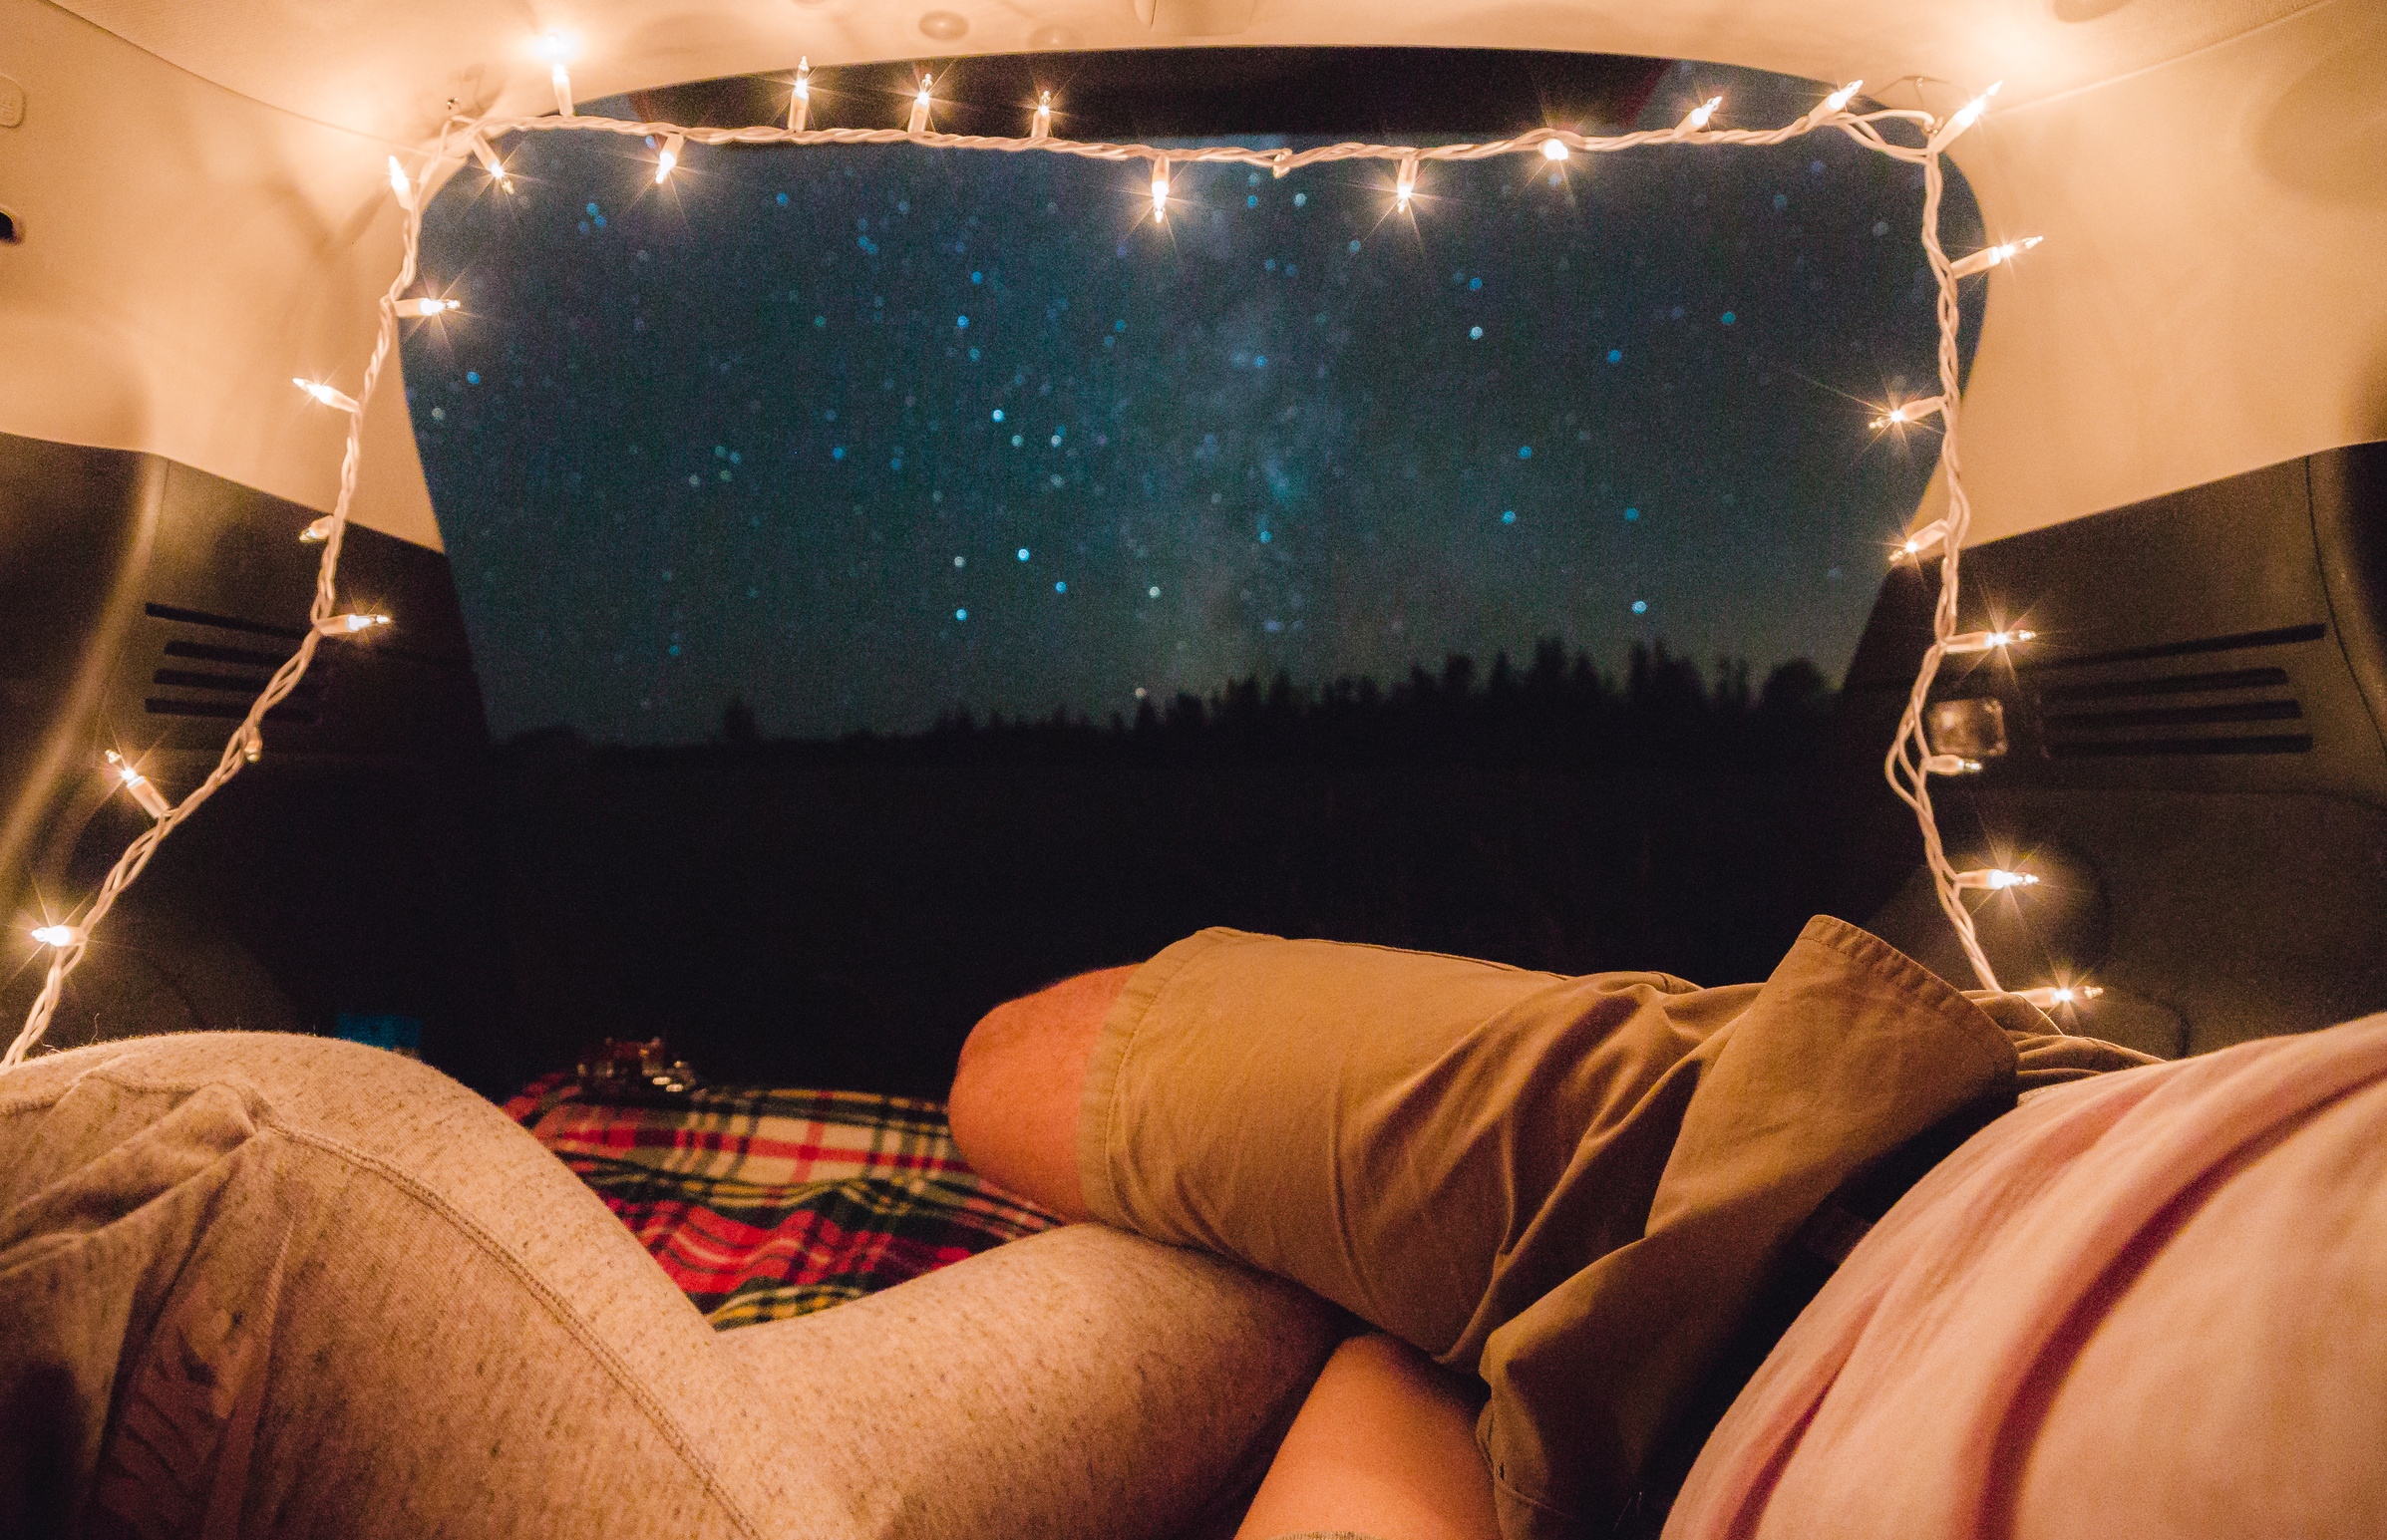 Personal perspective of night sky, as seen by couple inside tent